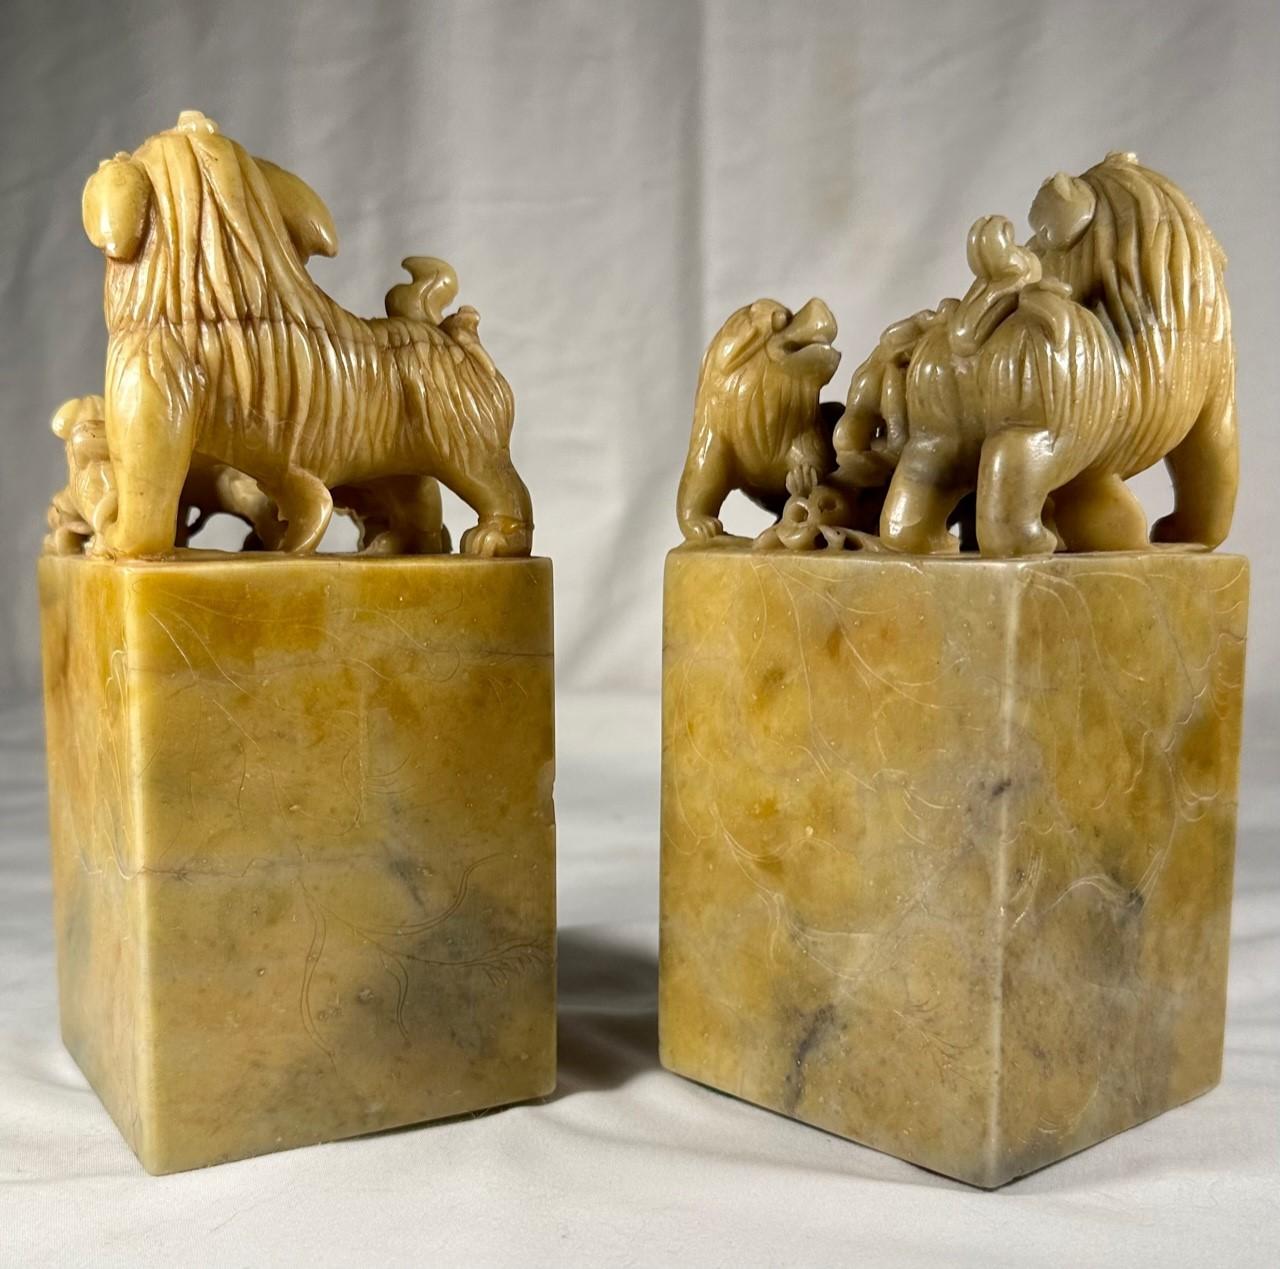 Pair of Large Chinese Qing Dynasty Carved Soapstone Seals.

Large and rare pair of hand carved soapstone Foo Dog seals. Beautiful sculptures of finely carved group of Foo Dogs topping a rectangular plinth with floral panels encised on the sides.